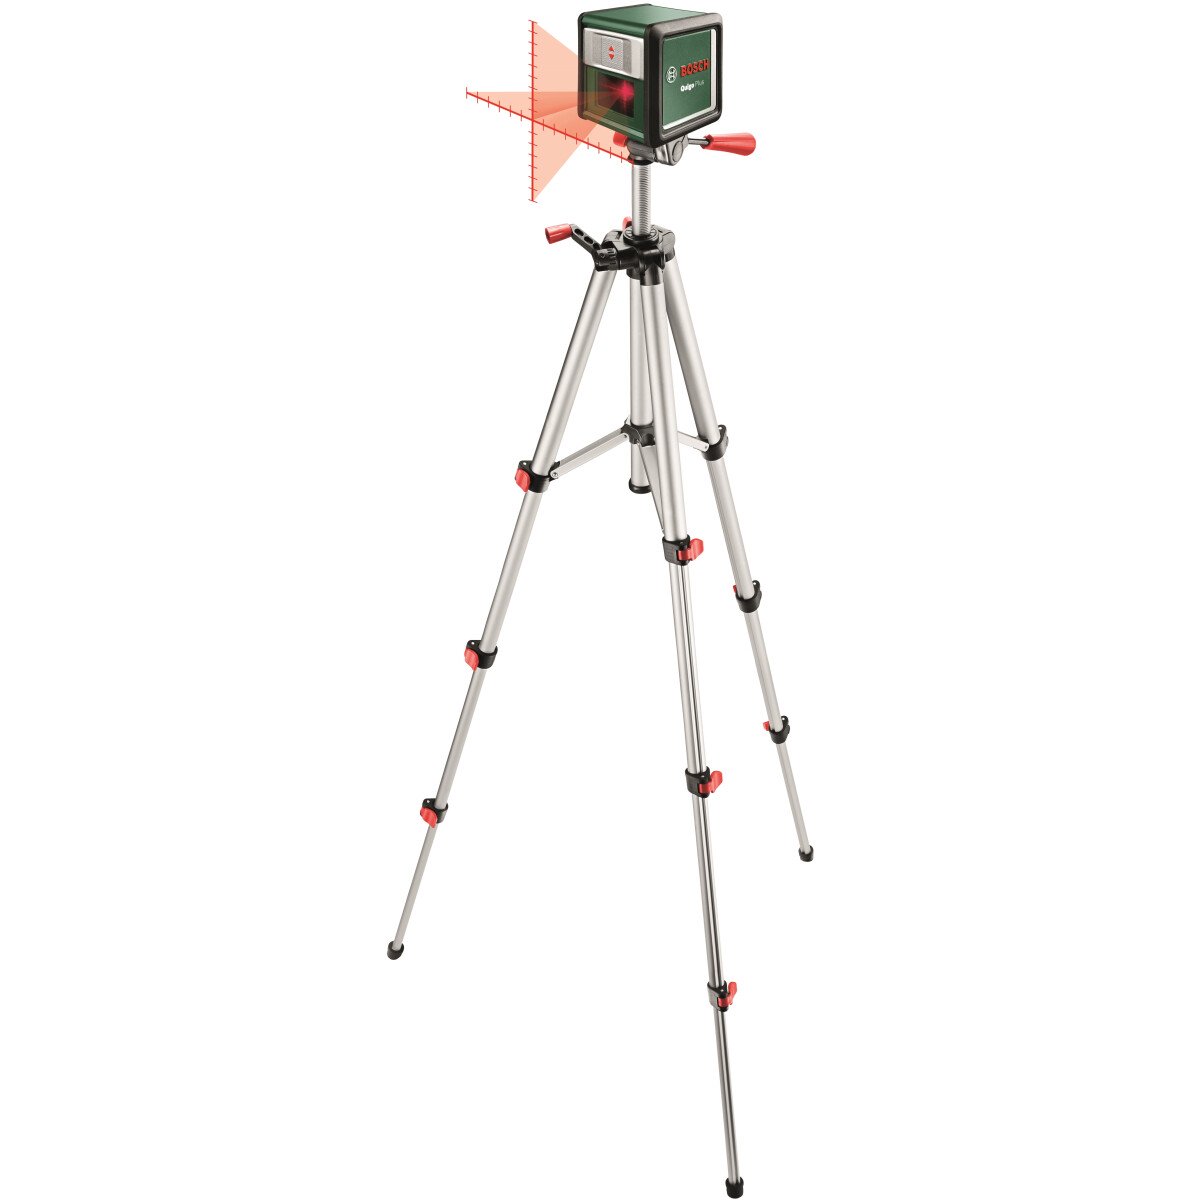  Quigo Plus Cross Line Laser with Tripod from Lawson HIS